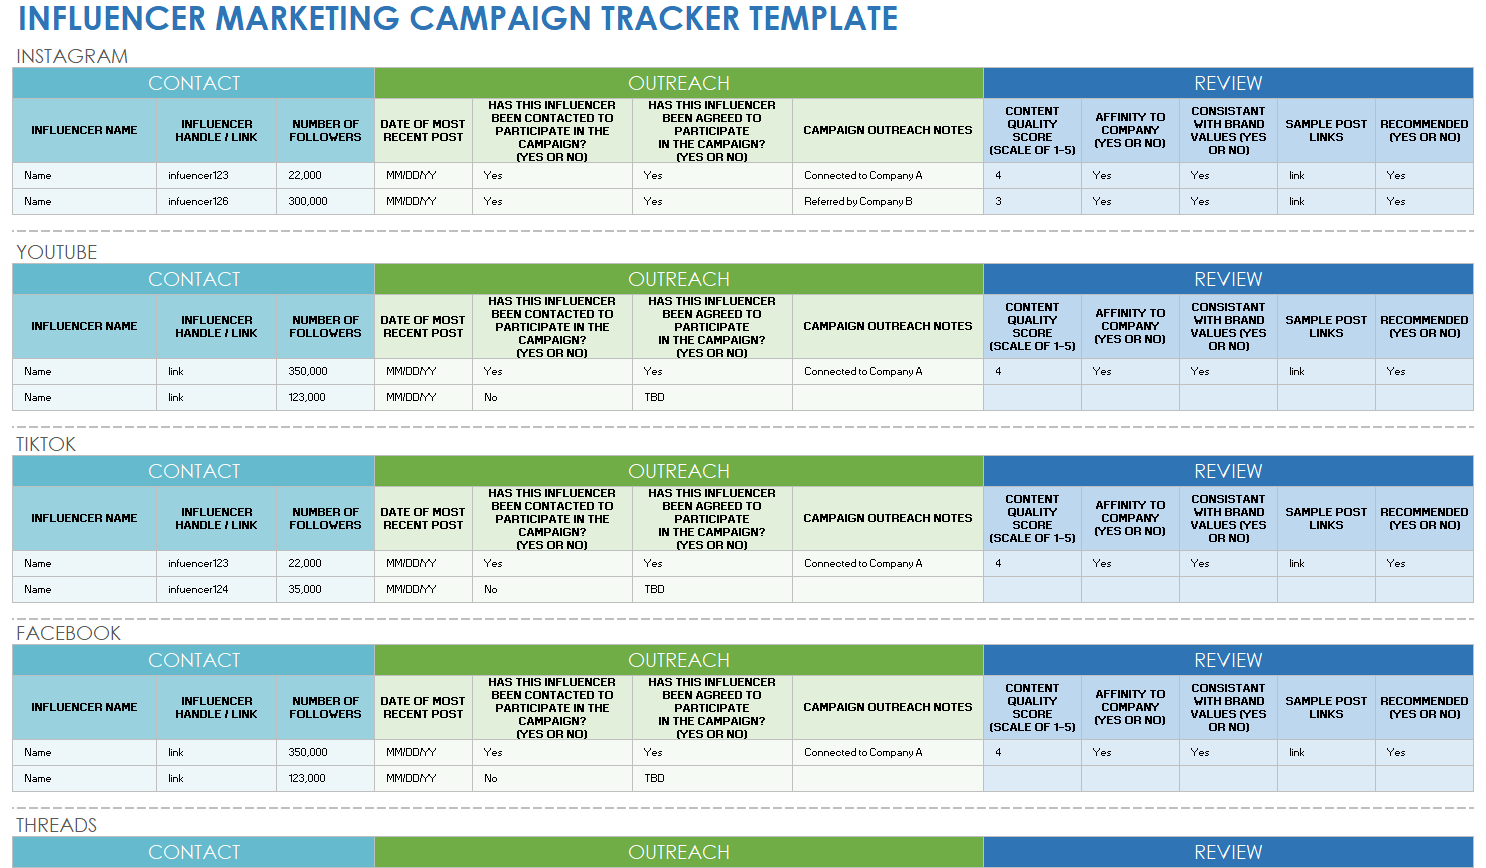 Influencer Marketing Campaign Tracker Template